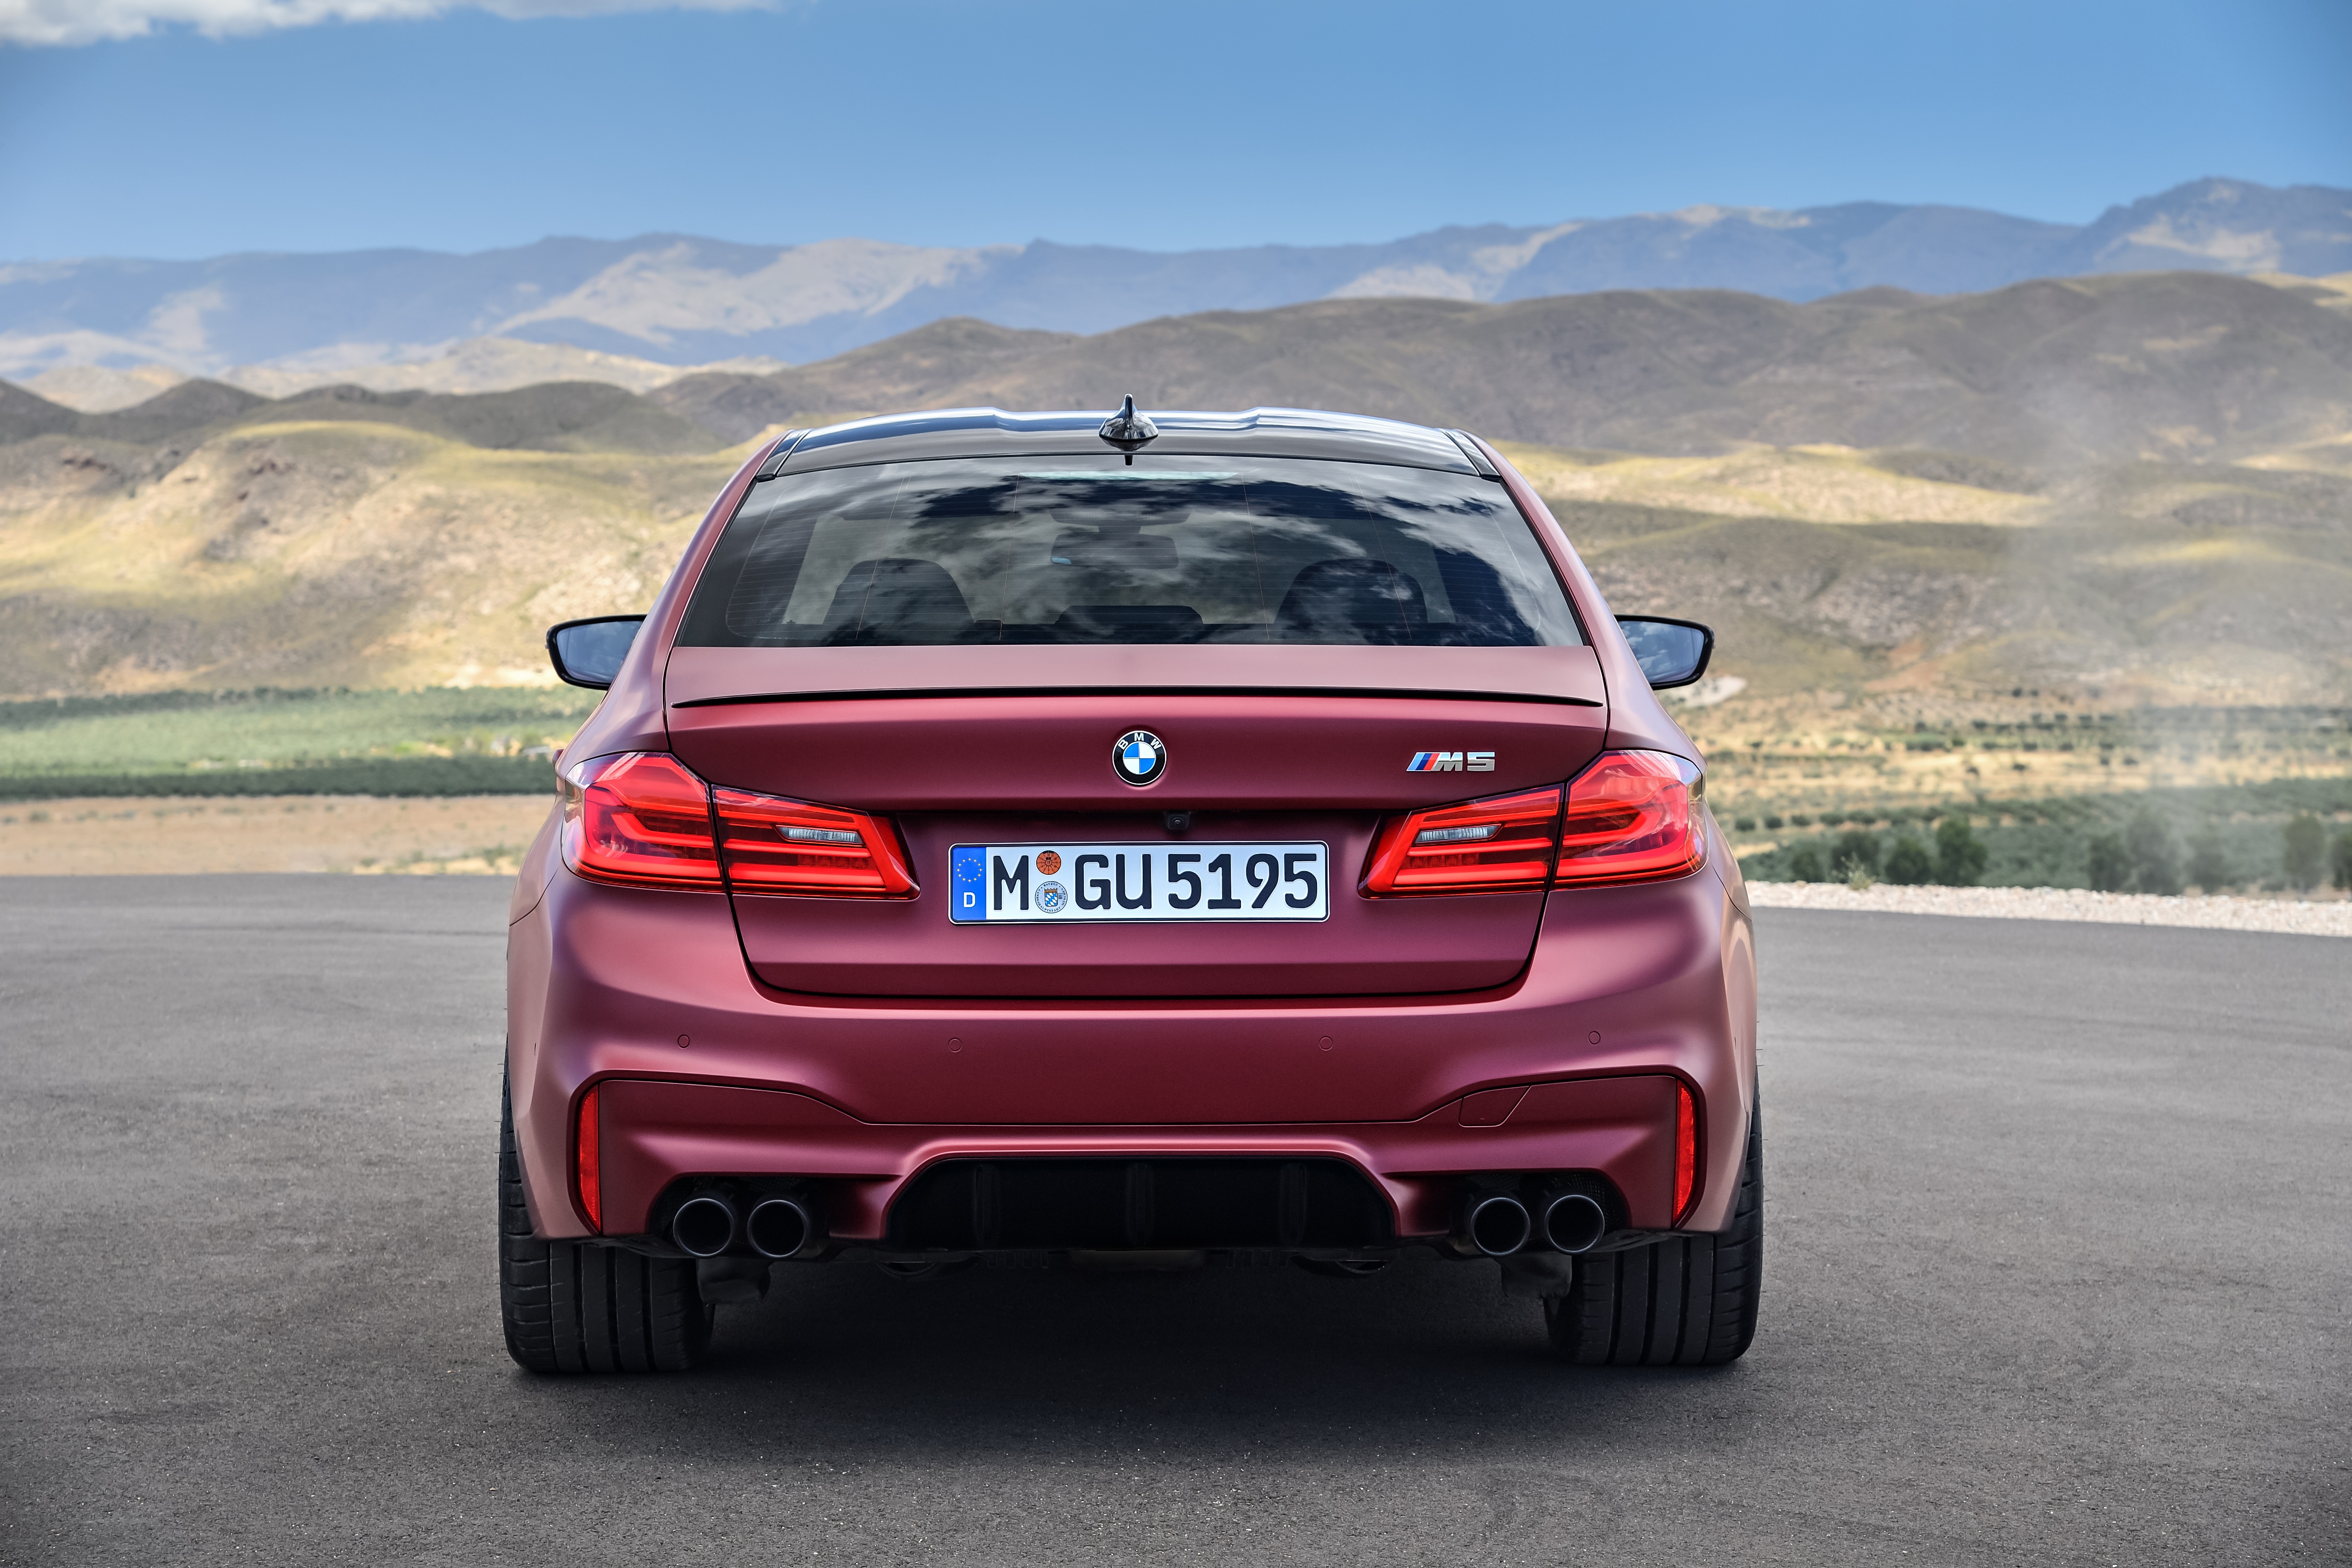 Ава м5 ф90. БМВ m5 f90. BMW m5 f90 2018. BMW m5 f90 2017. BMW m5 f90 first Edition.